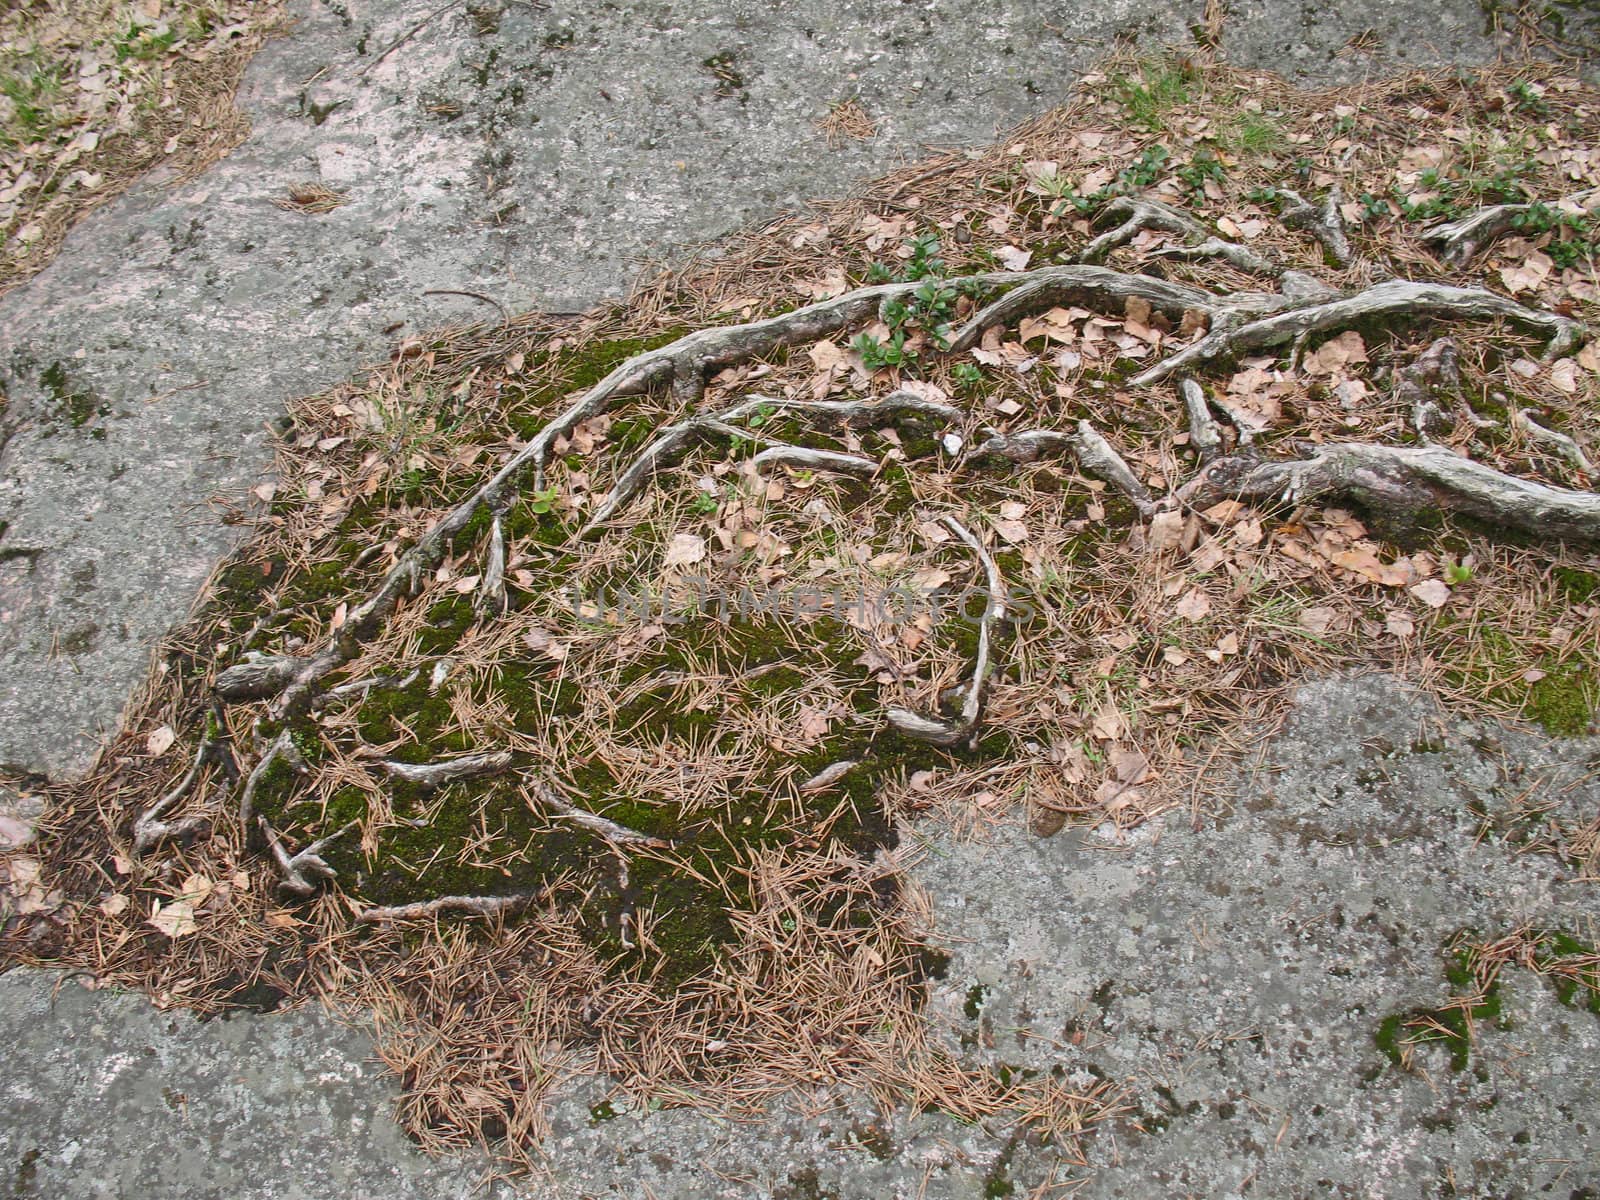 Roots of an old tree, grown around and over rocks